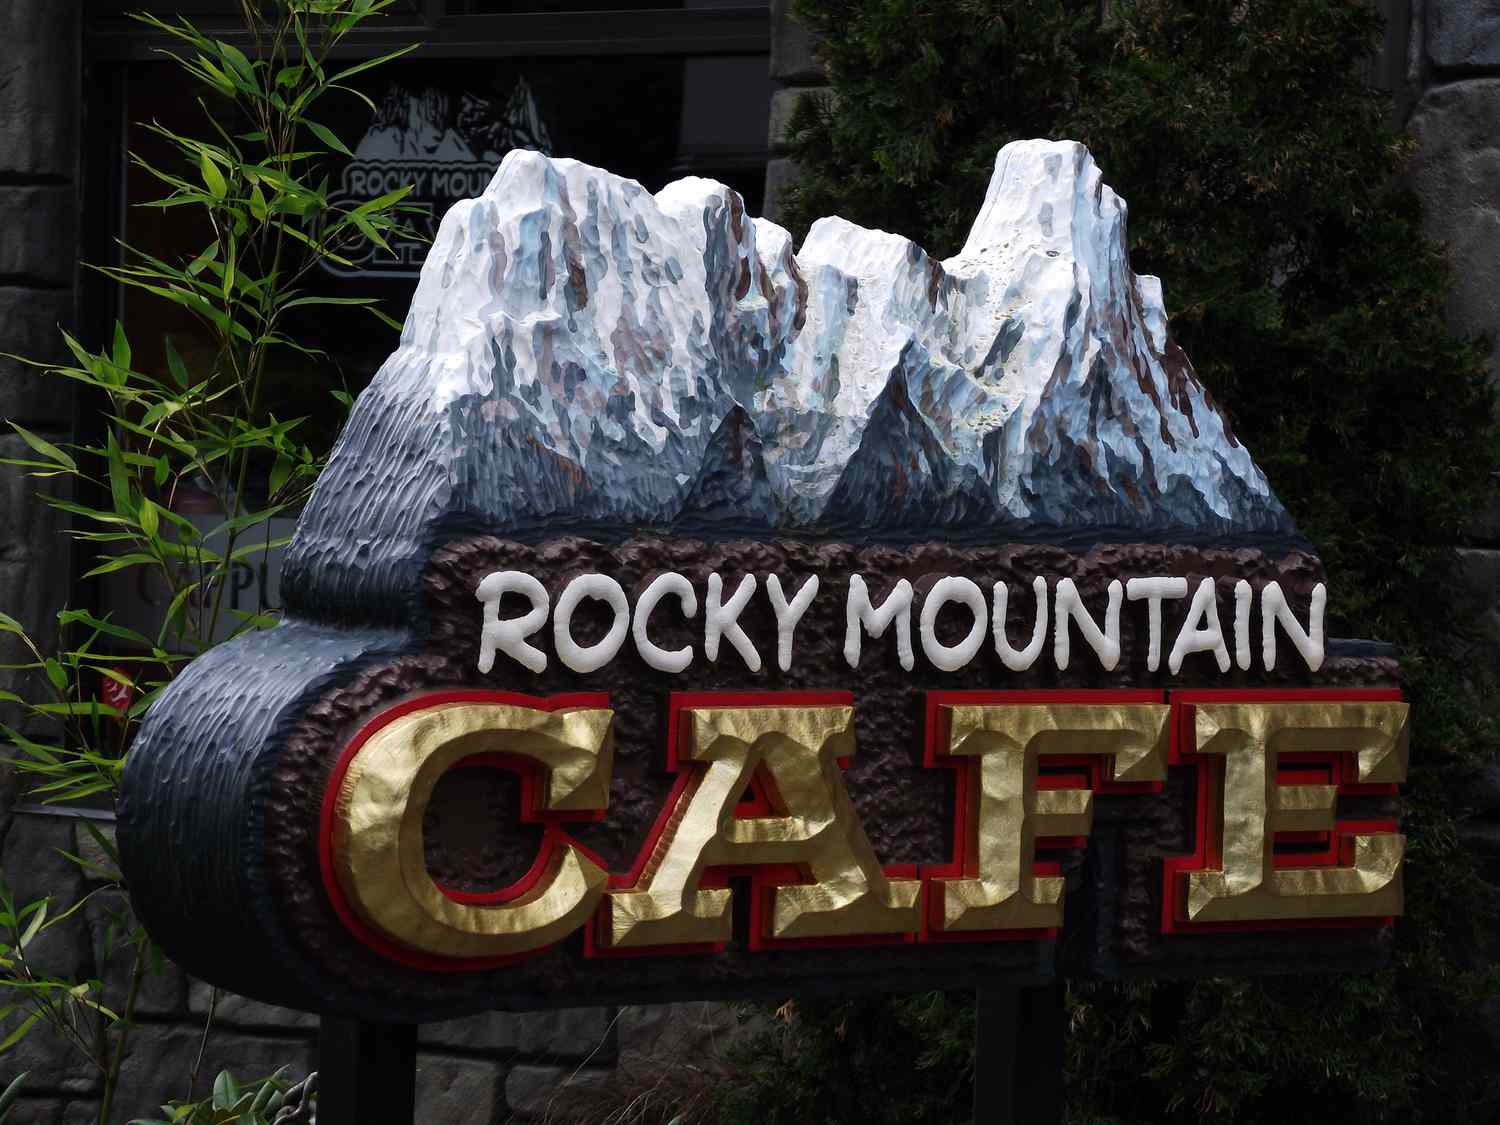 Rocky Mountain Cafe sign.